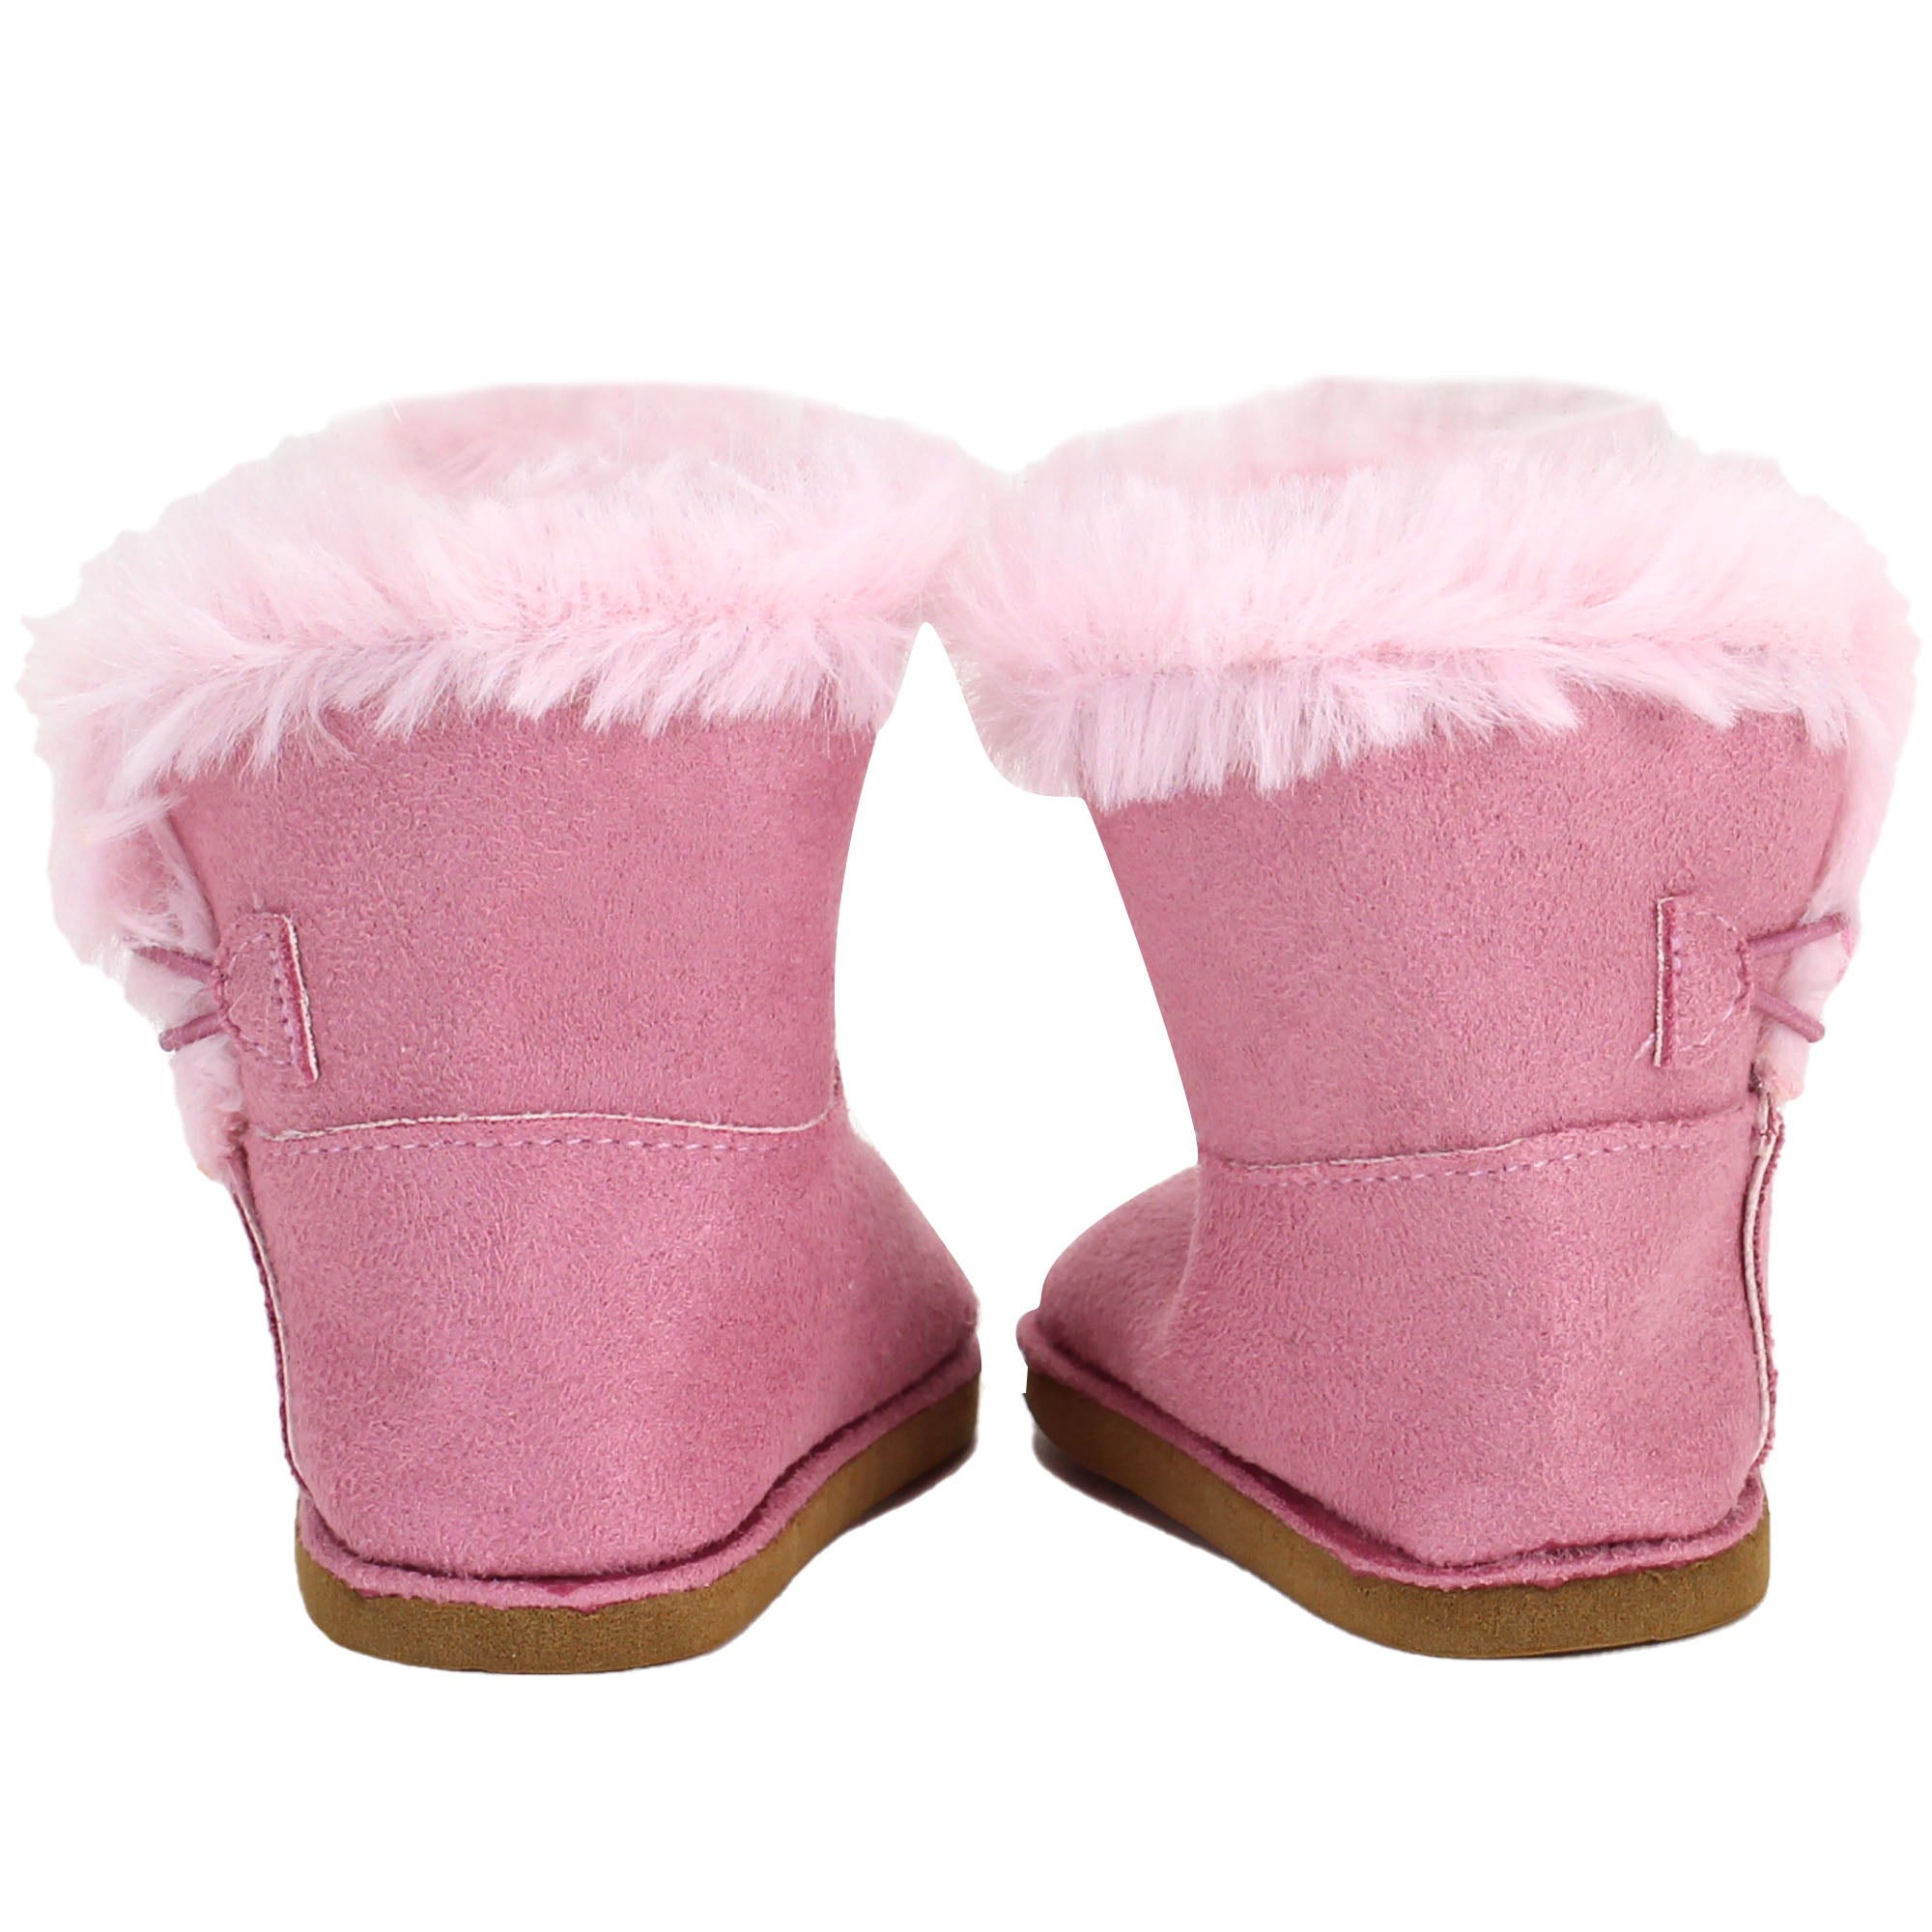 Sophia's Winter Boots for 18" Dolls, Pink